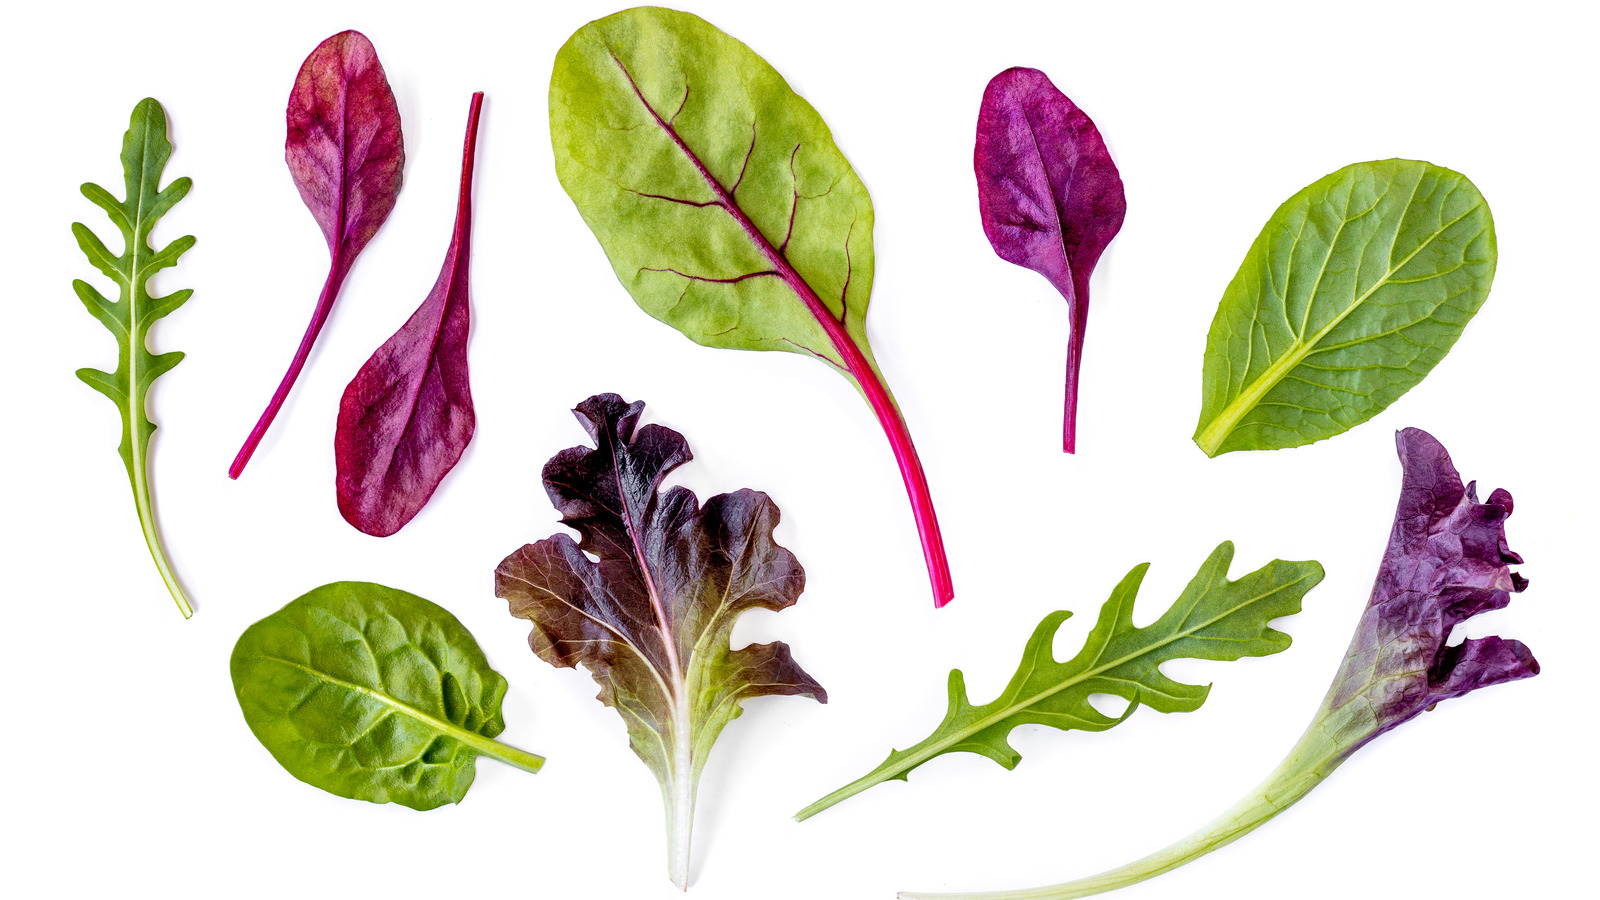 20 Types of Greens to Spruce Up Your Meals